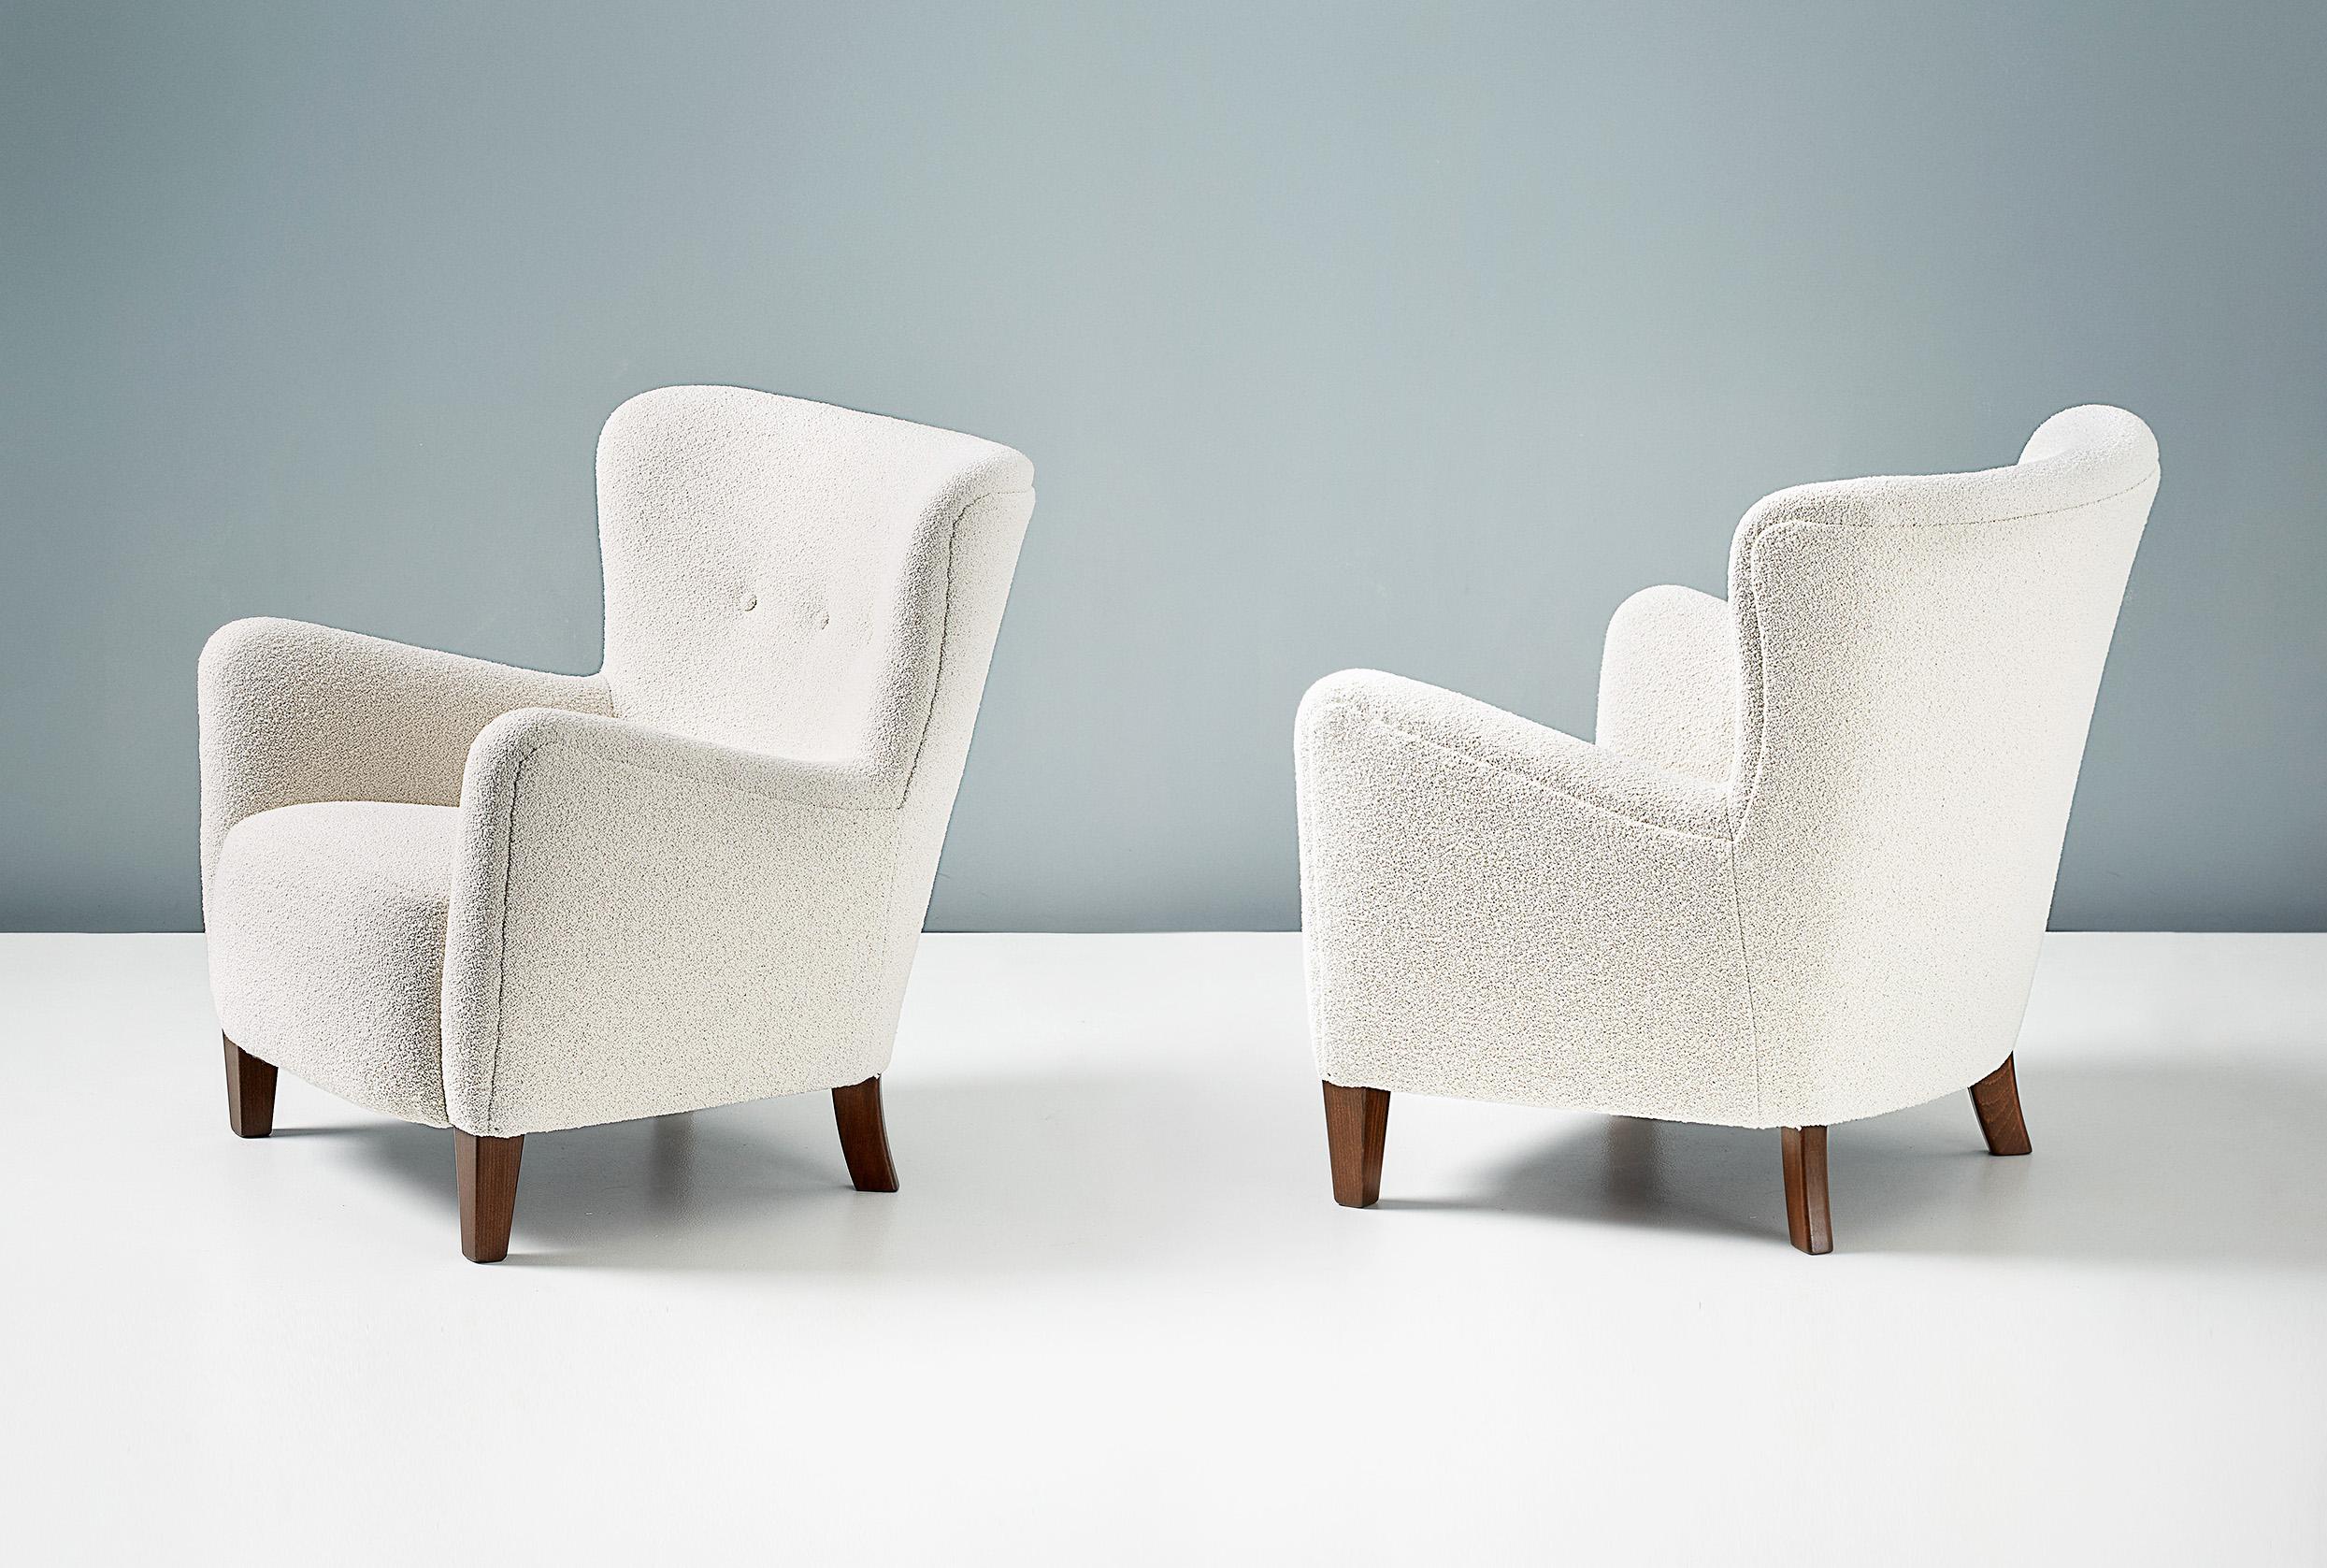 Dagmar design

RYO Armchairs

A pair of custom made lounge chairs developed and produced at our workshops in London using the highest quality materials. These examples are upholstered in luxurious cotton-wool blend off-white bouclé fabric and